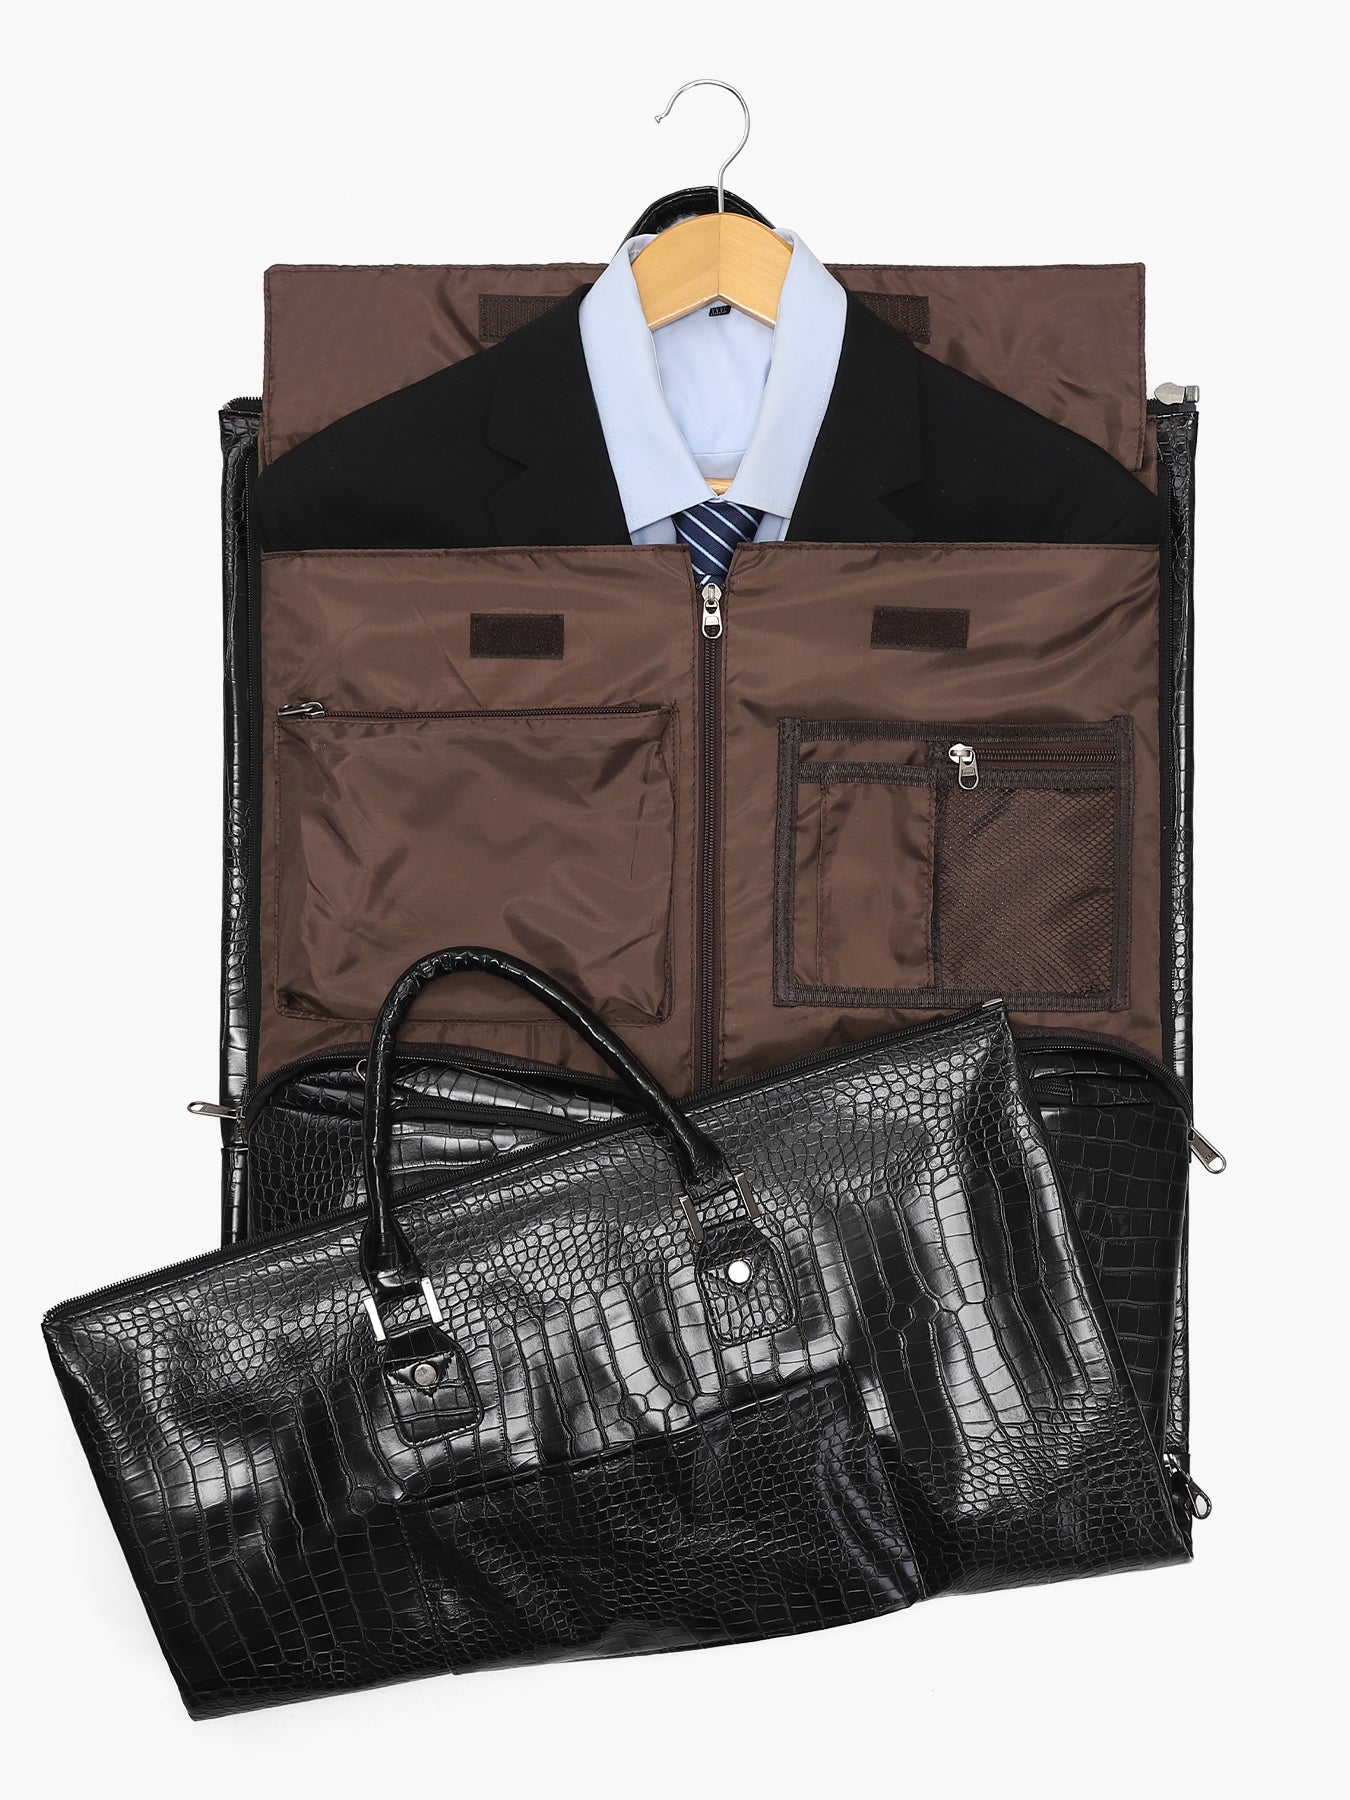 Garment Bags for Travel, Convertible Garment Bag with Detachable Hanging  Suit Bag, Carry on Travel Duffel Bag with Shoulder and Backpack Straps